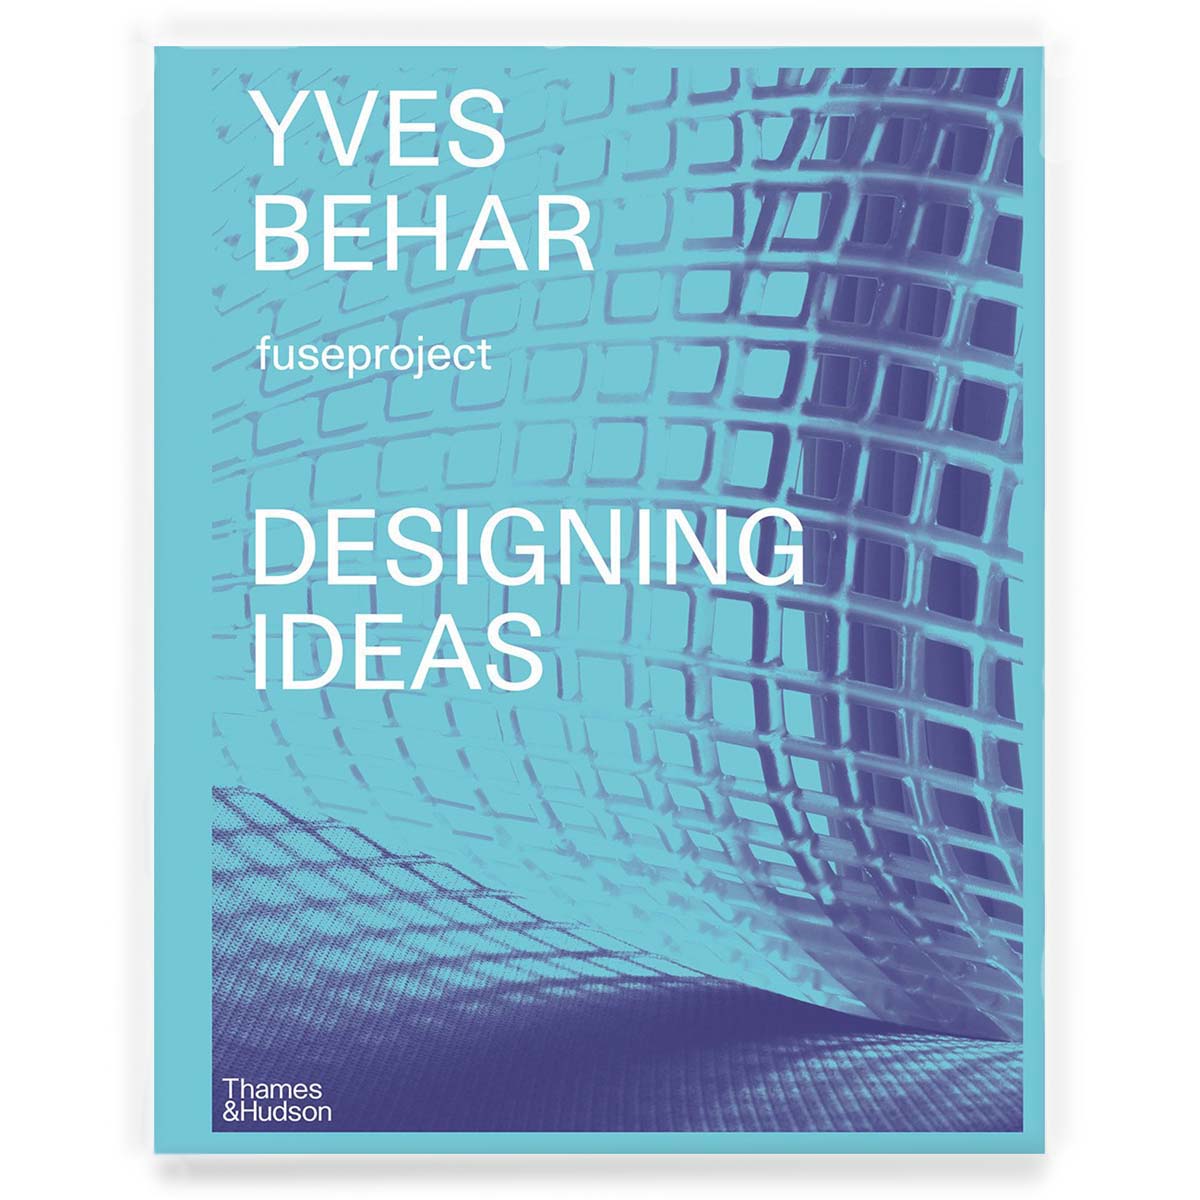 Yves Béhar: Designing Ideas: Twenty Years Of Fuseproject's front cover.